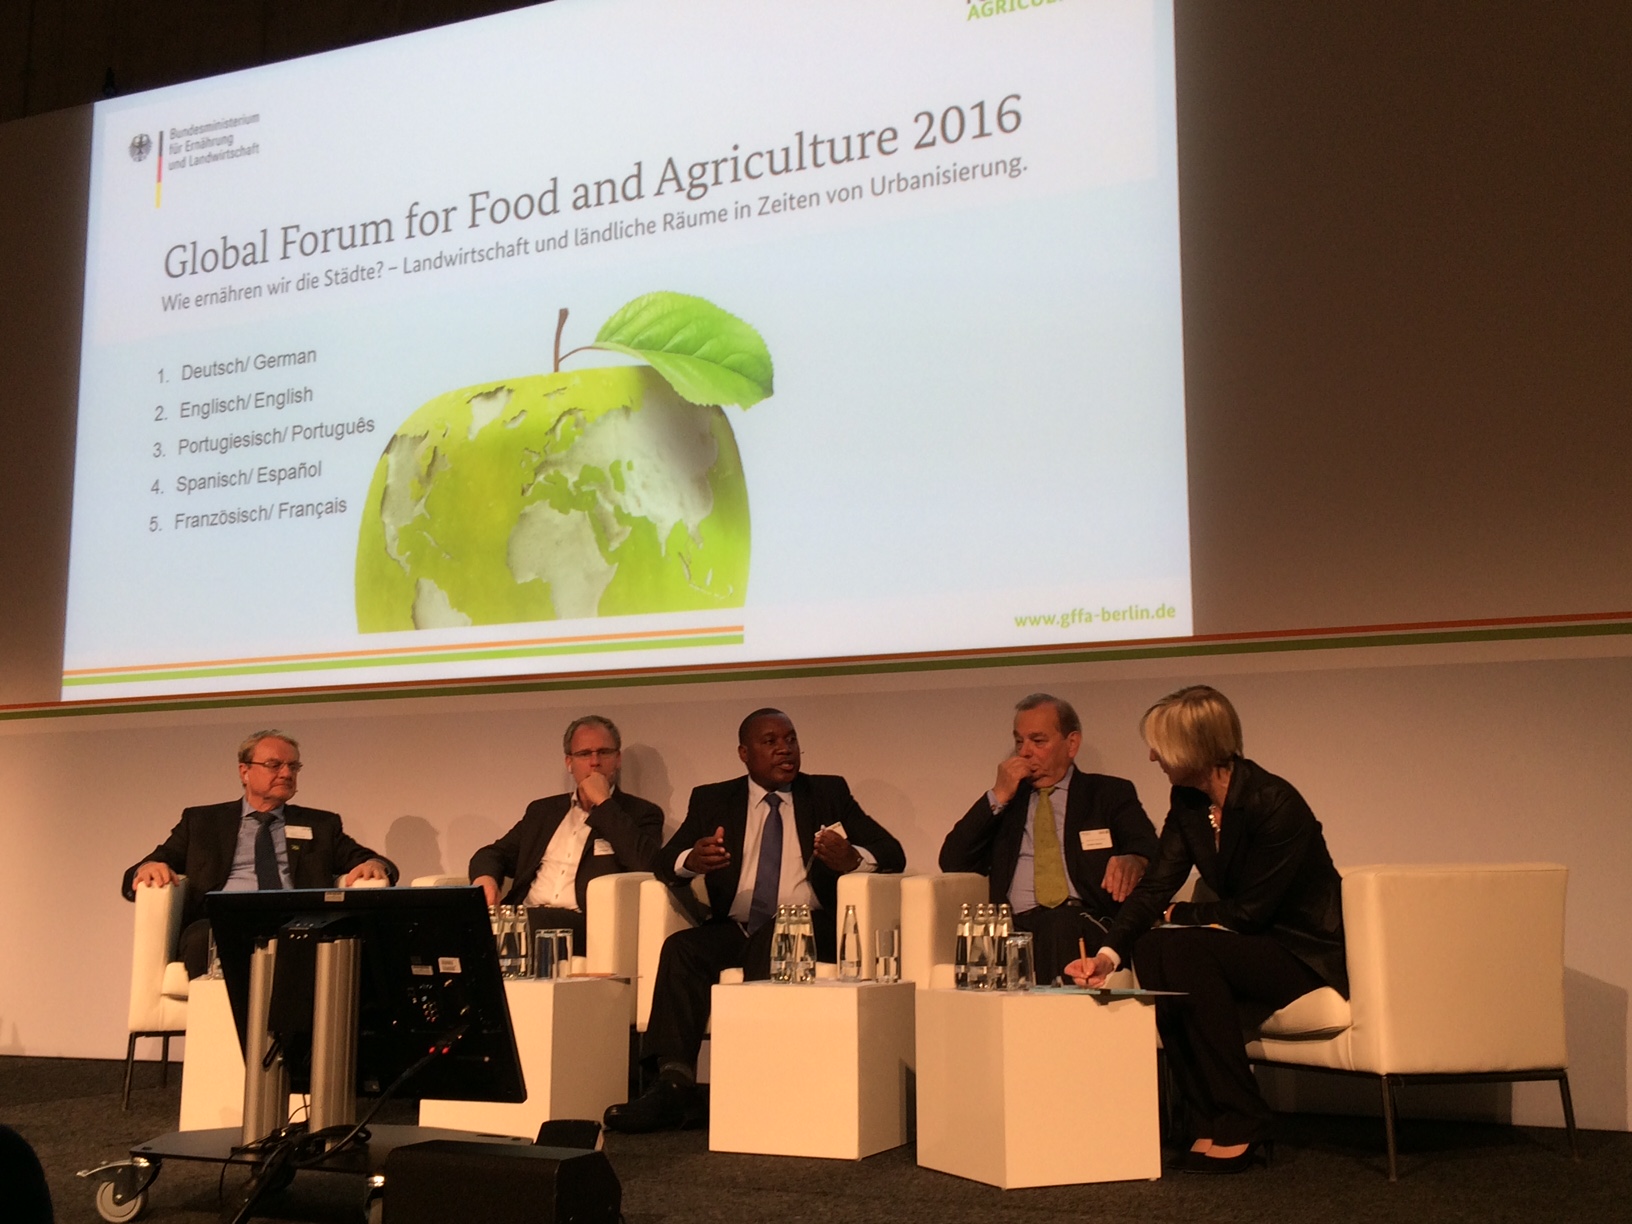 Global Forum for Food and Agriculture 2016 agrinatura